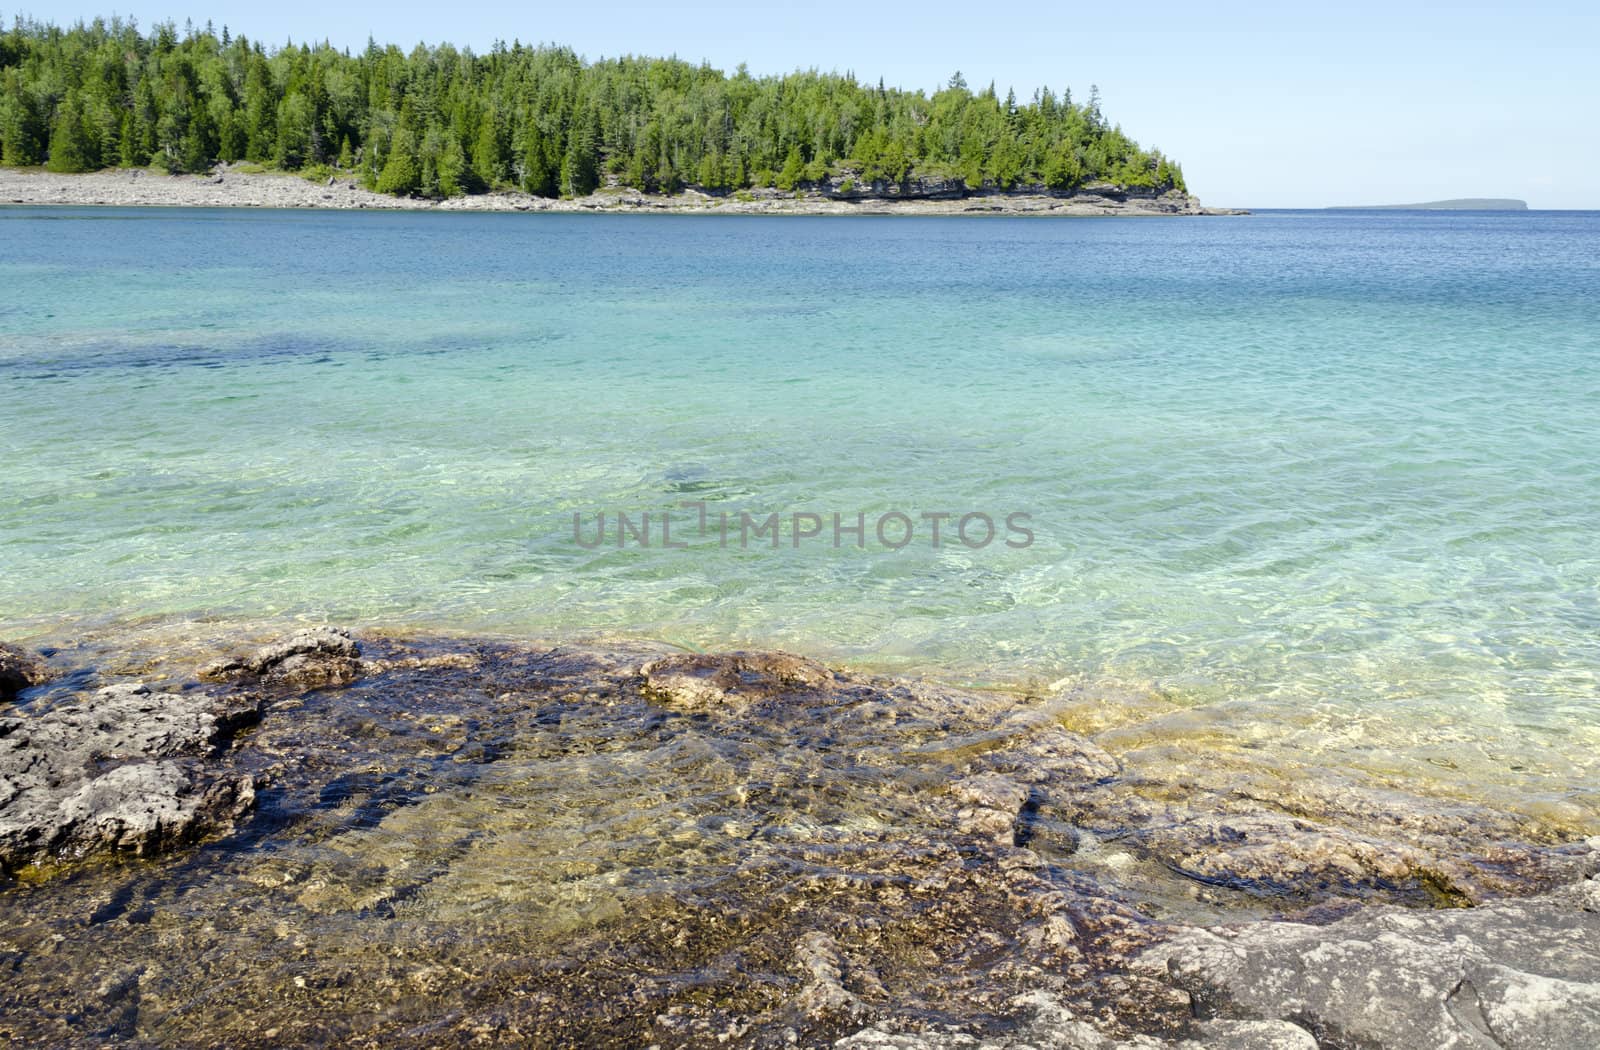 Green and blue water of Huron Lake, Ontario under blue sky.